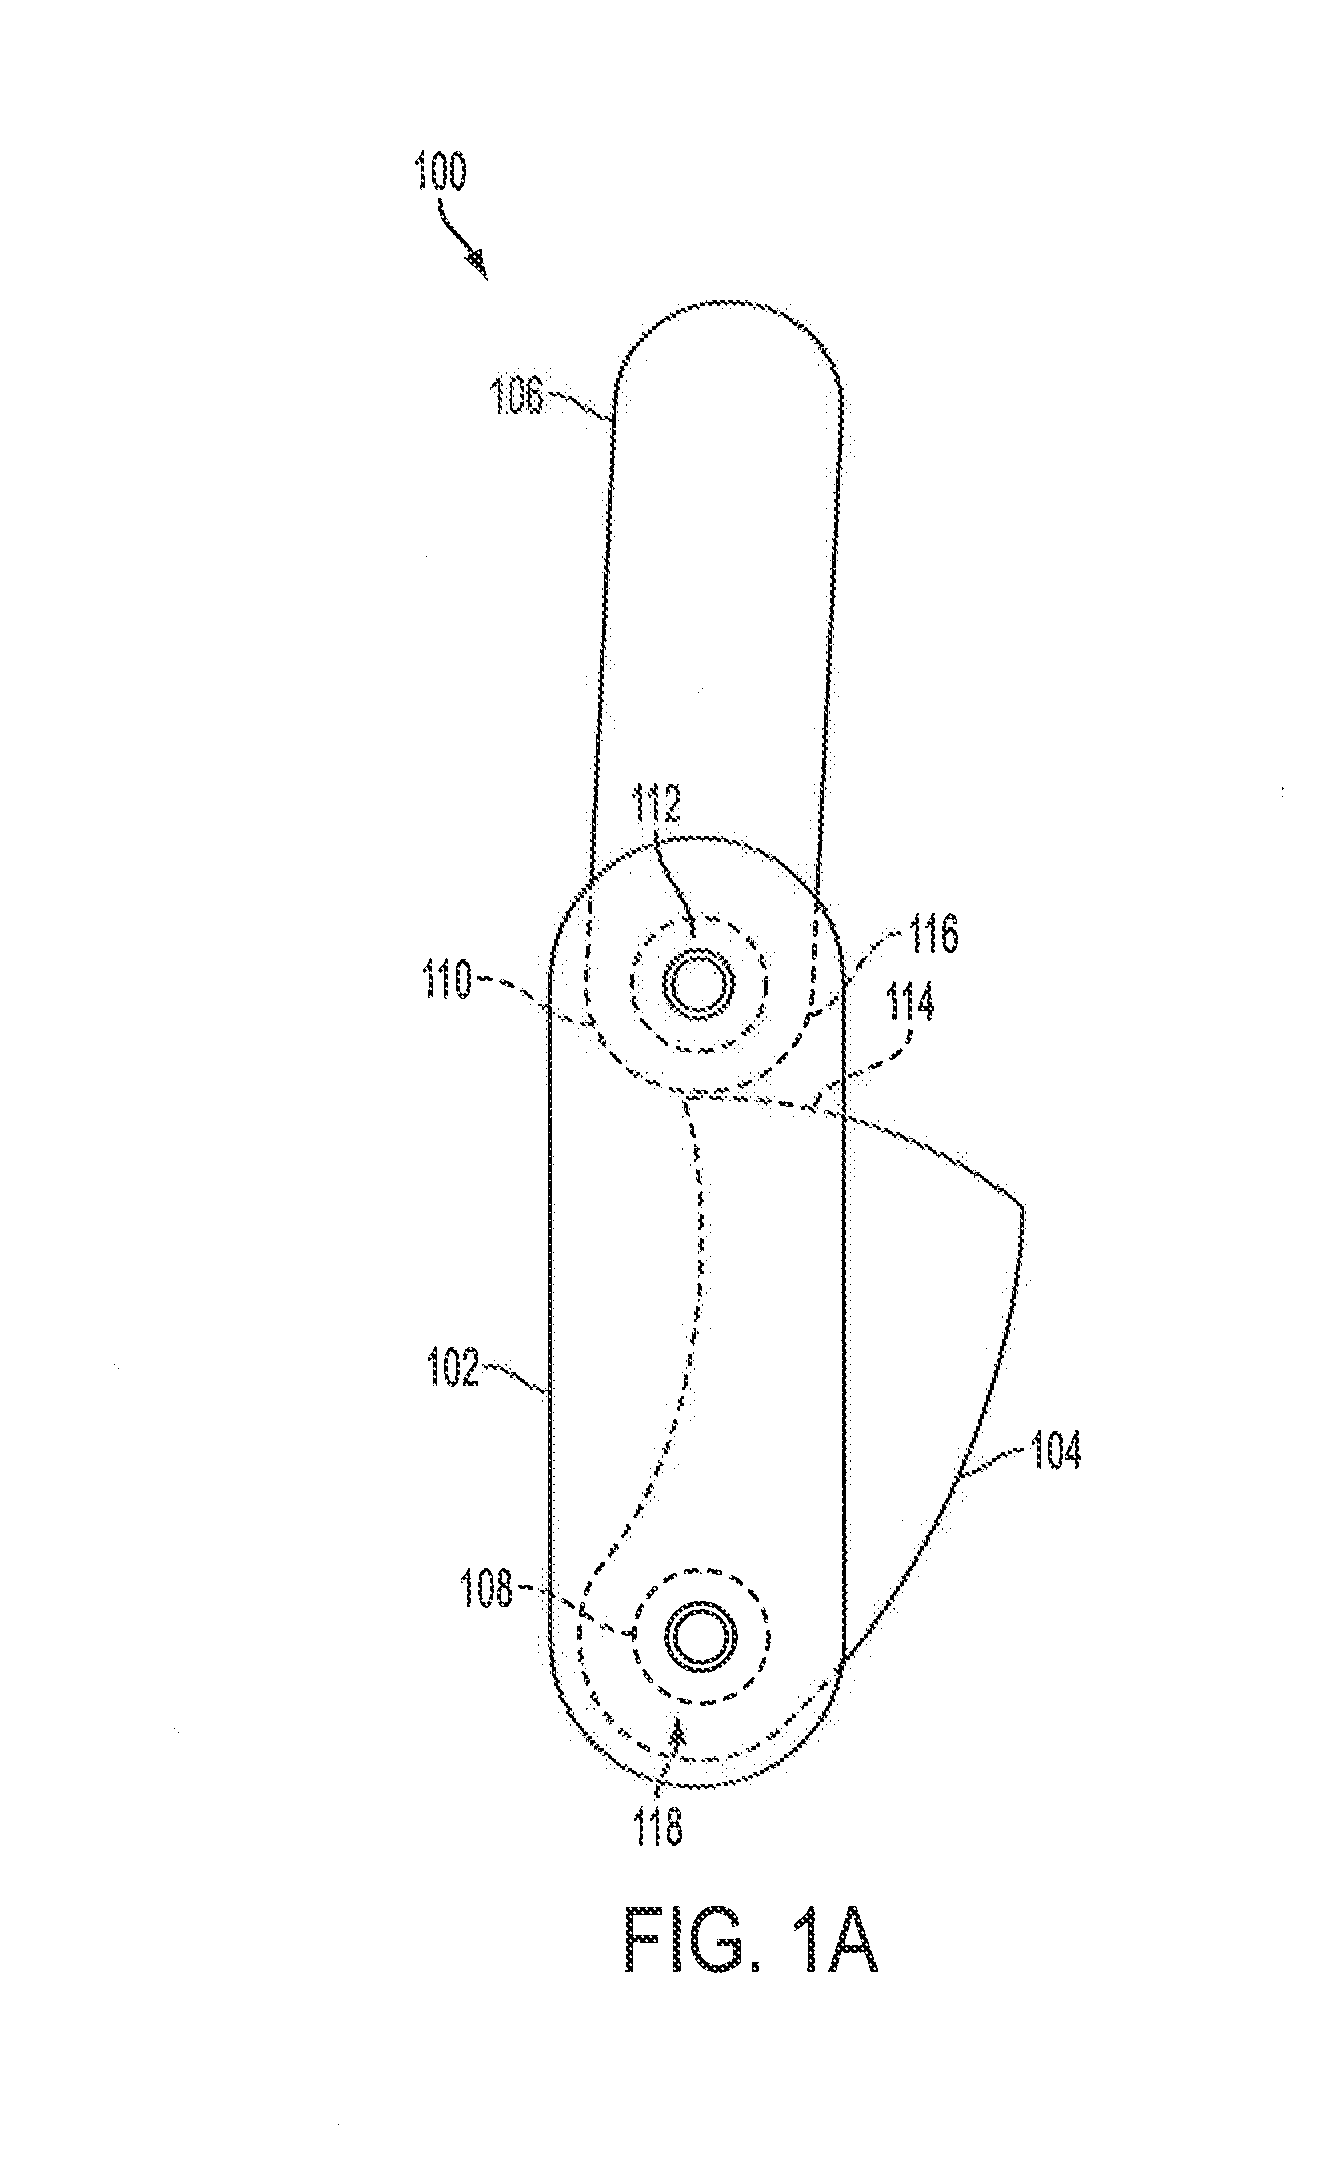 Interconnected phalanges for robotic gripping